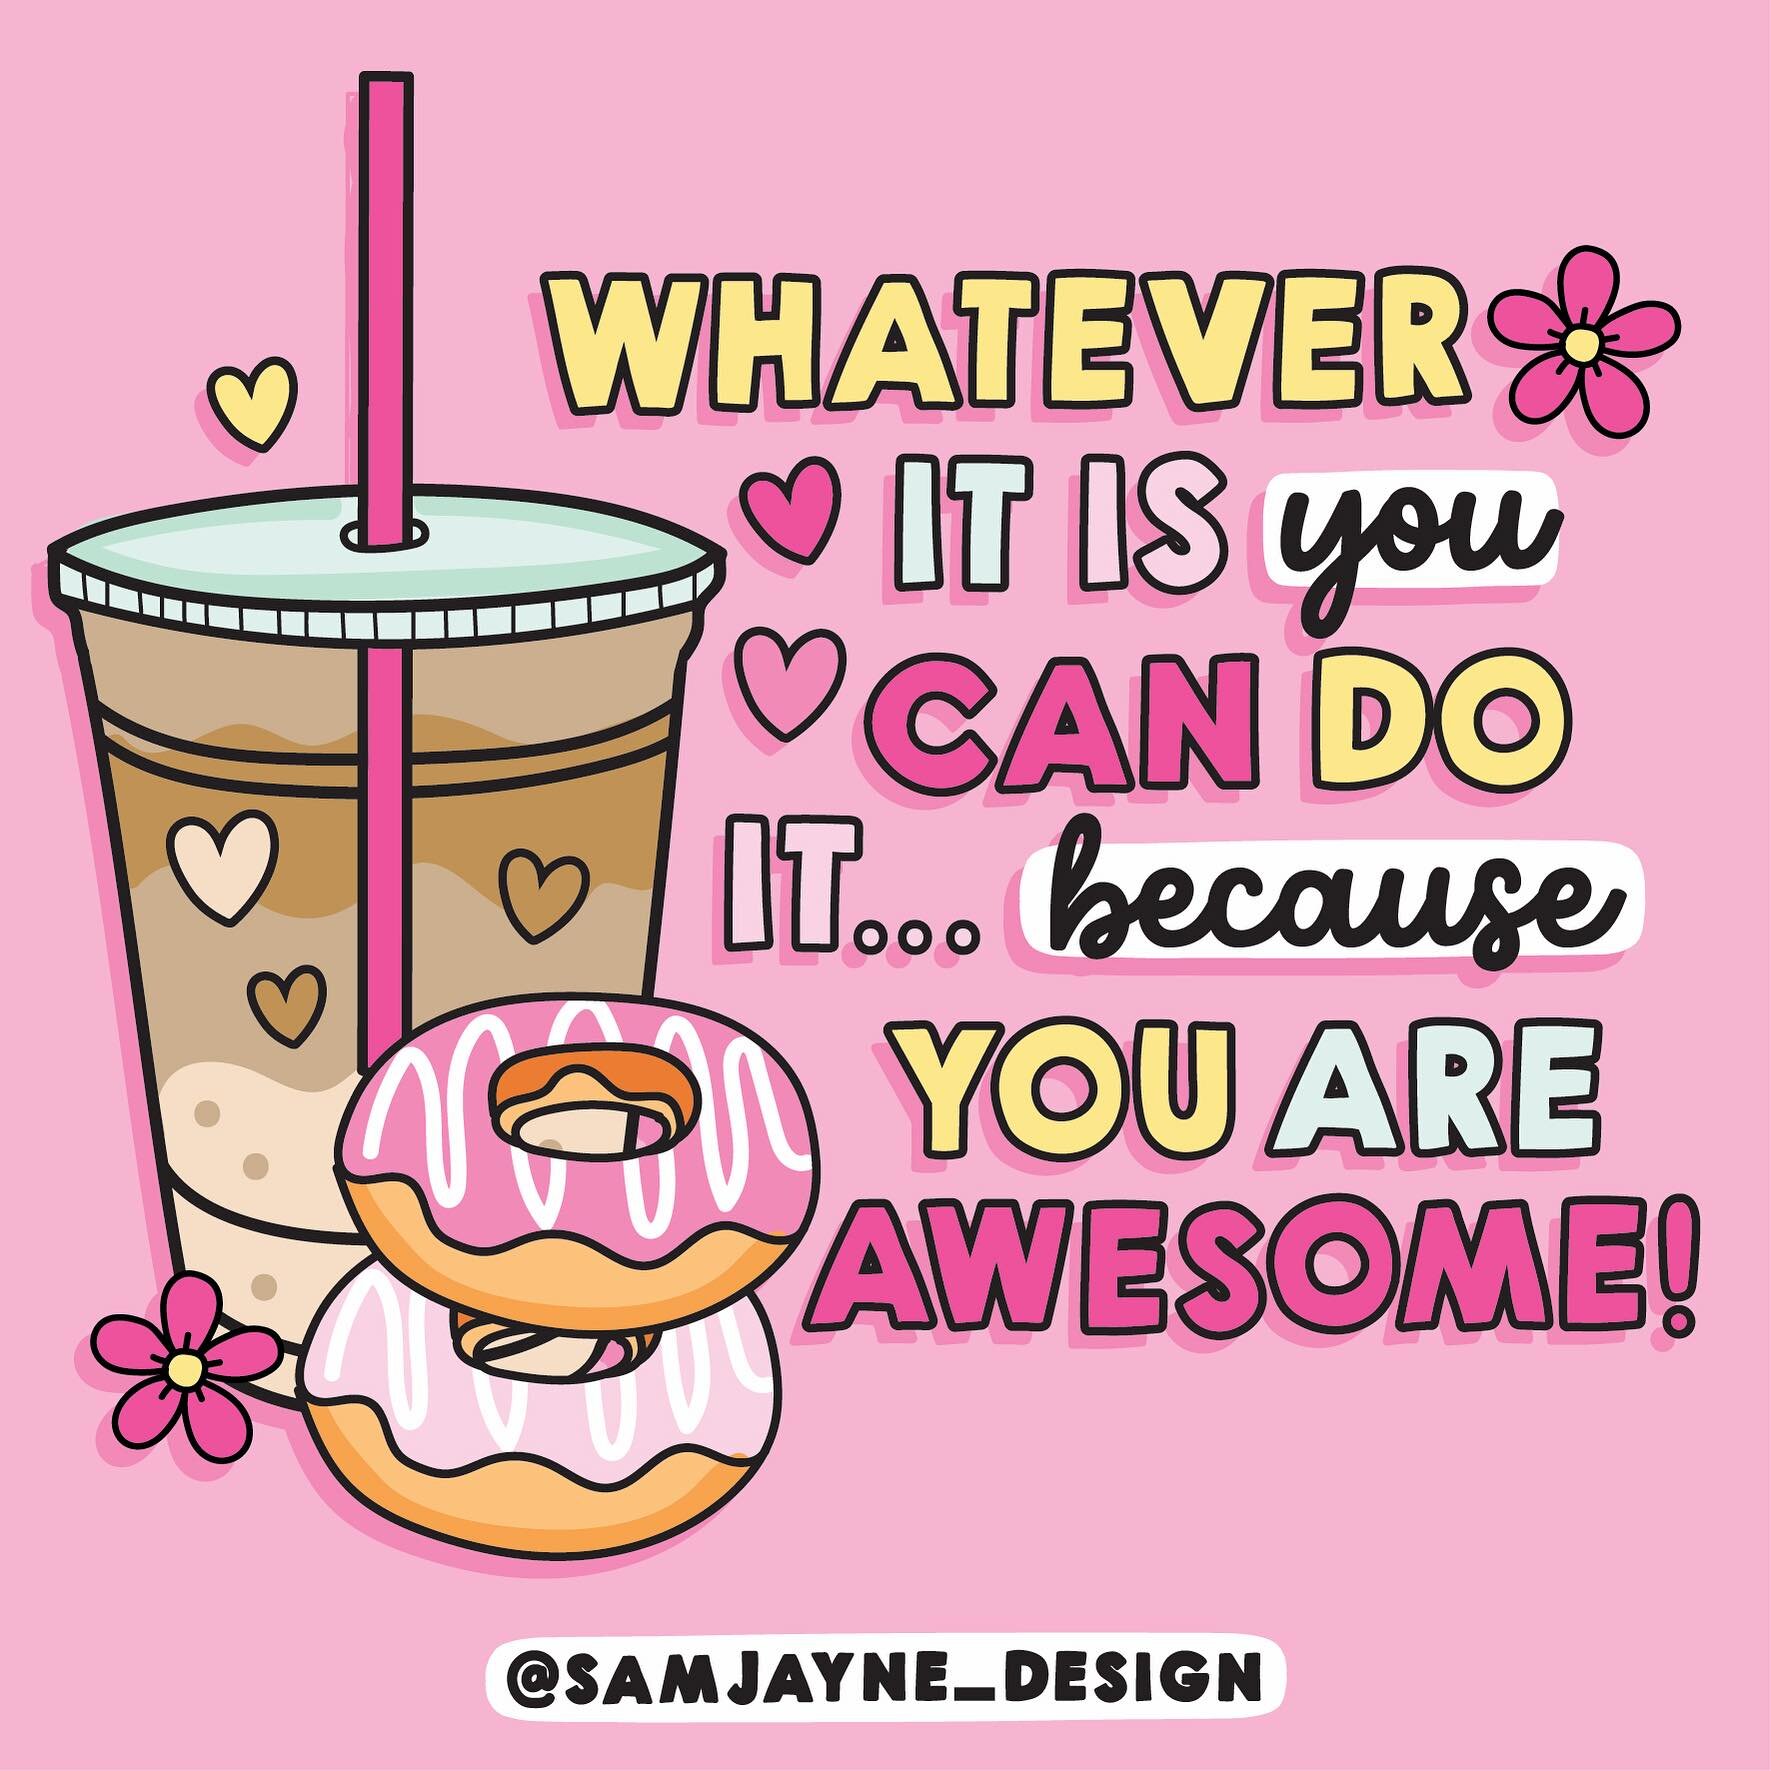 Now all I want is an iced coffee and donuts 🤣🍩 that aside it&rsquo;s so important to believe in yourself! You can do it I know you can! 😄💖
.
.
.
.
.
.
#positivequote #designer #designersofinstgram #commercialdesign #printandpattern #doodle #surfa